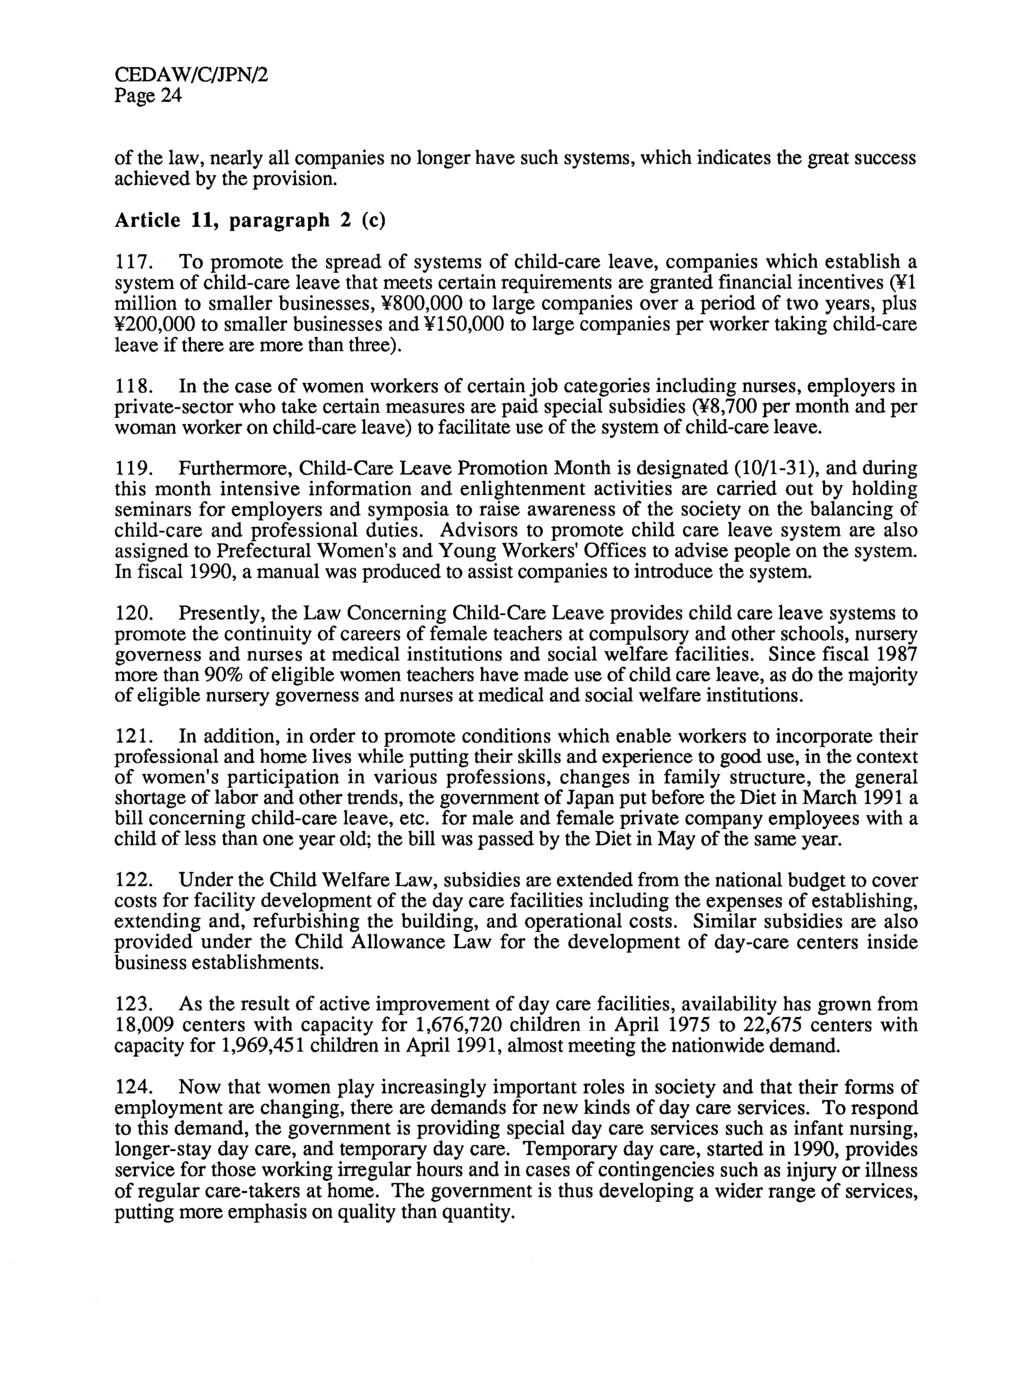 Page 24 of the law, nearly all companies no longer have such systems, which indicates the great success achieved by the provision. Article 11, paragraph 2 (c) 117.